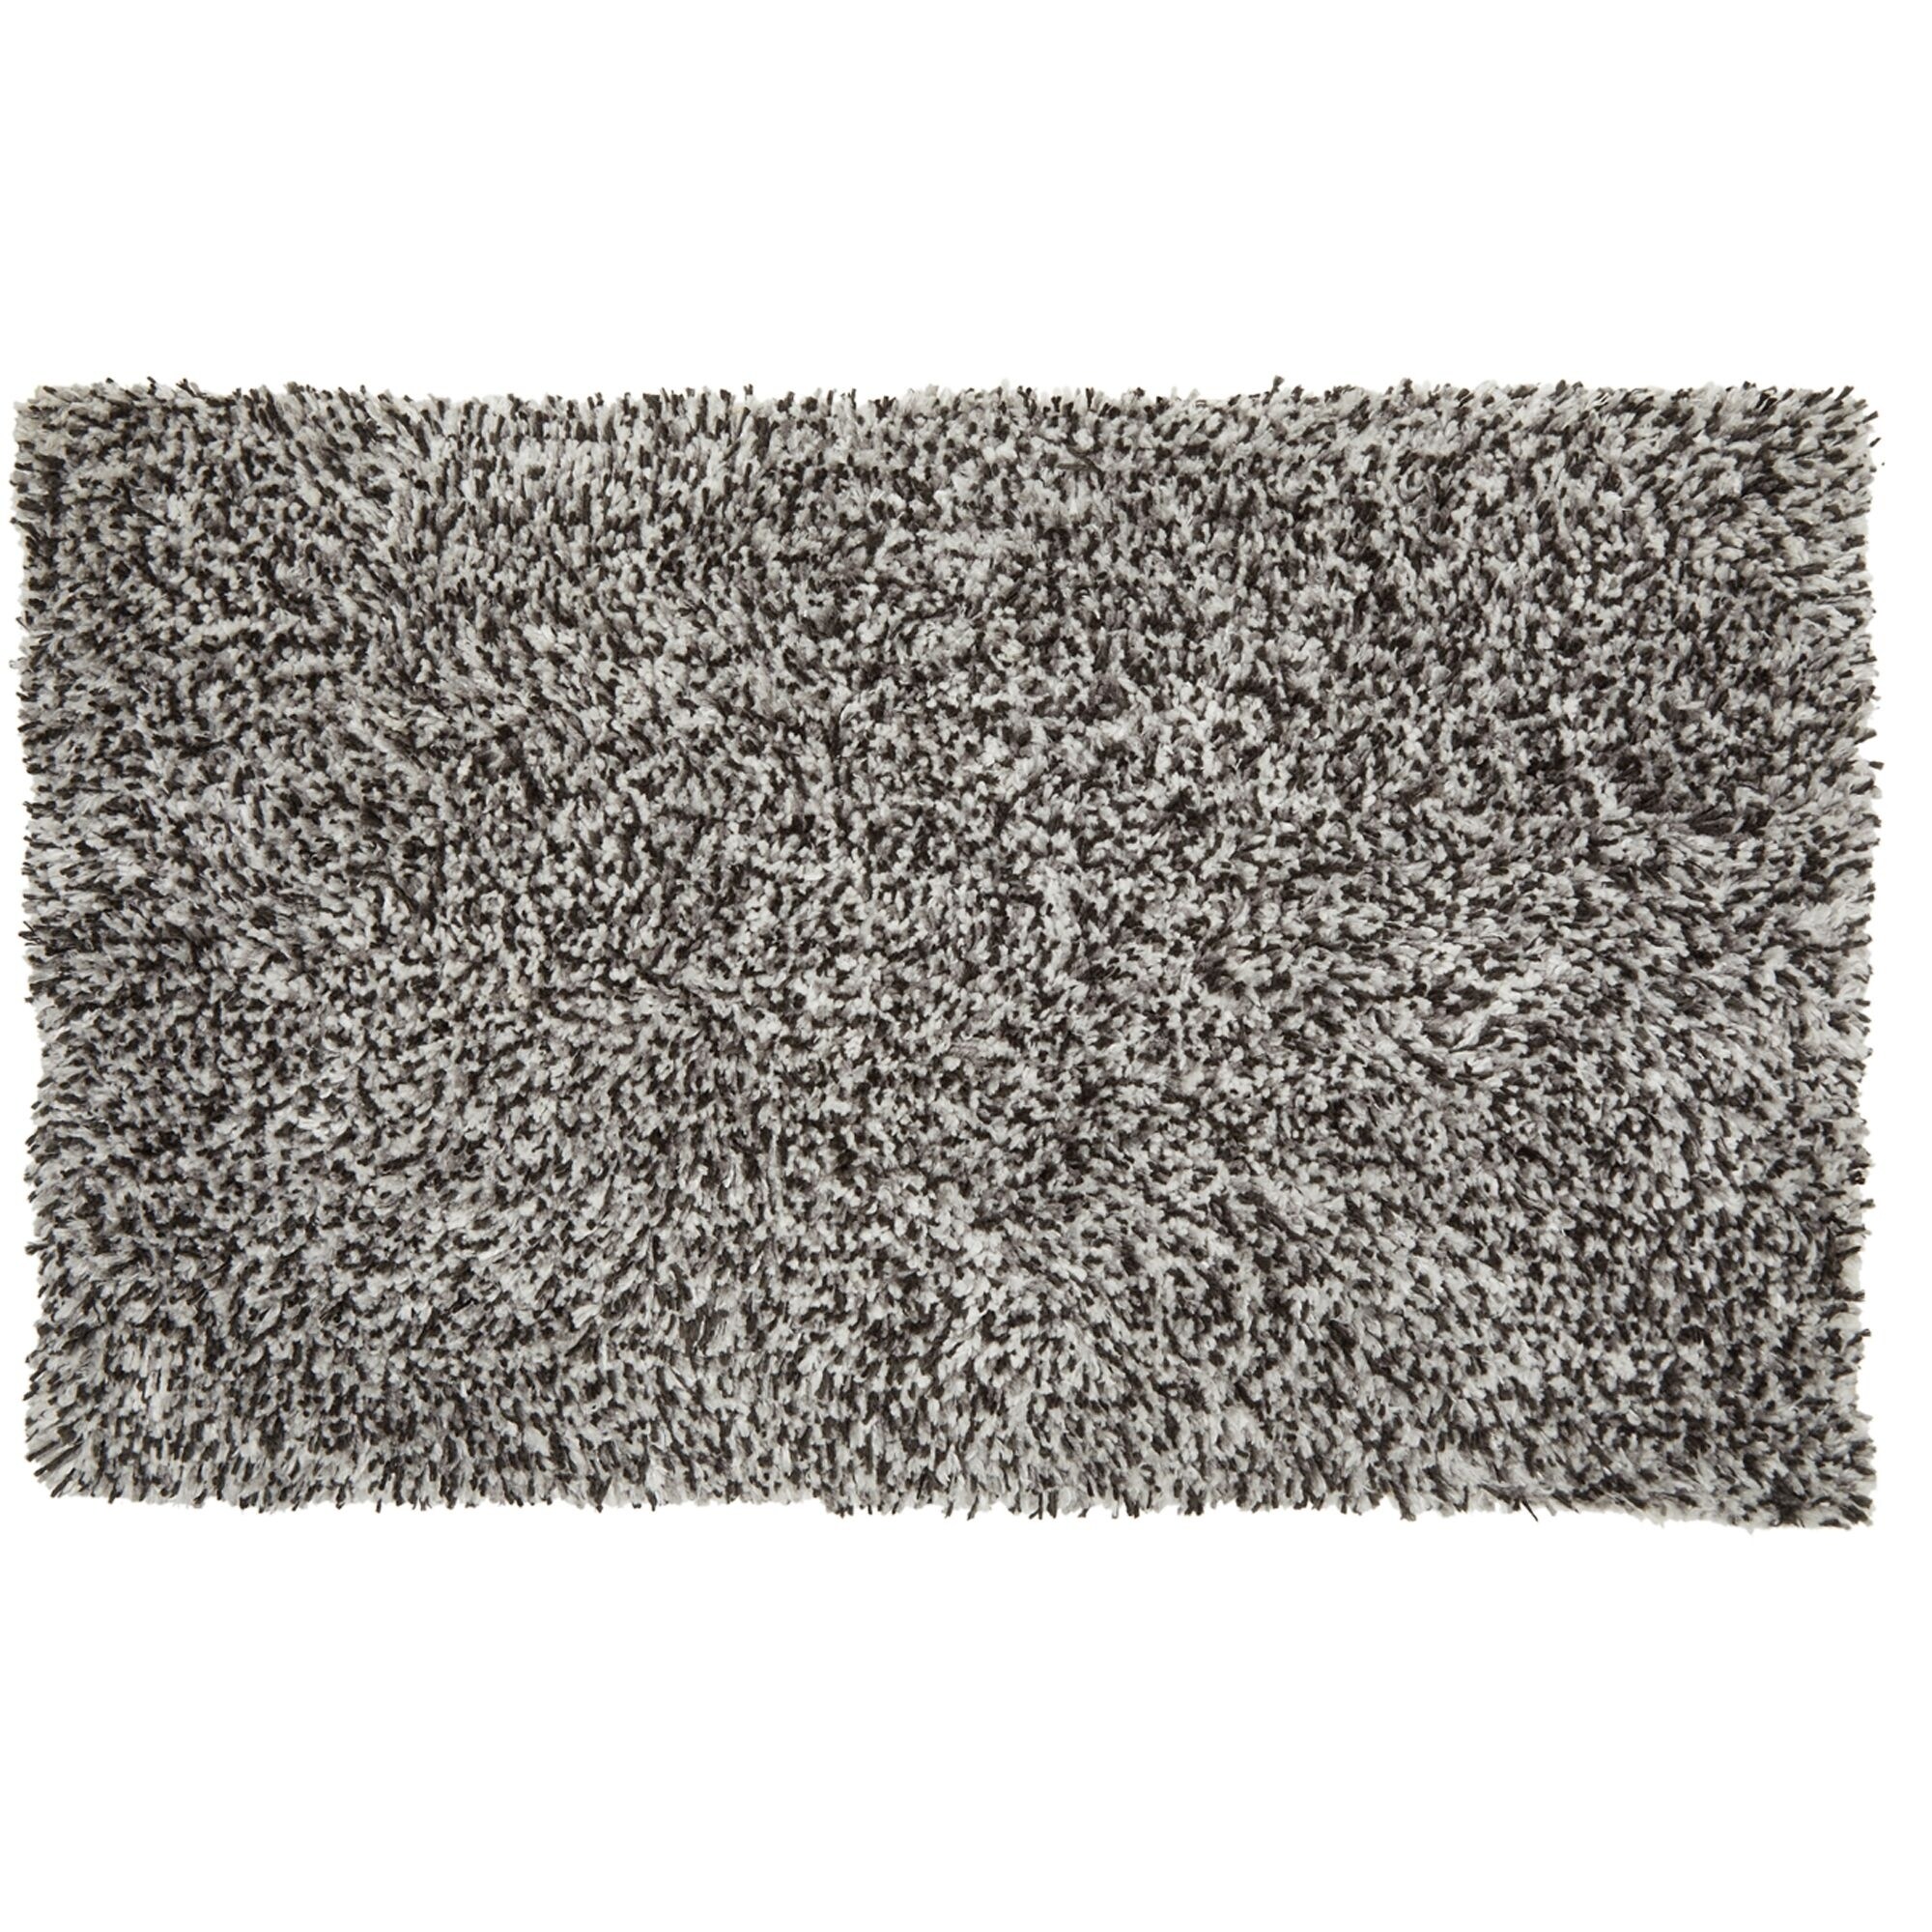 https://ak1.ostkcdn.com/images/products/is/images/direct/adfedd69e412488cfd150cd76edd68c32529d902/Light-Grey-Bath-Mat%2C-Non-Slip-Bathroom-Rug-for-Showers-%2832-x-20-Inches%29.jpg